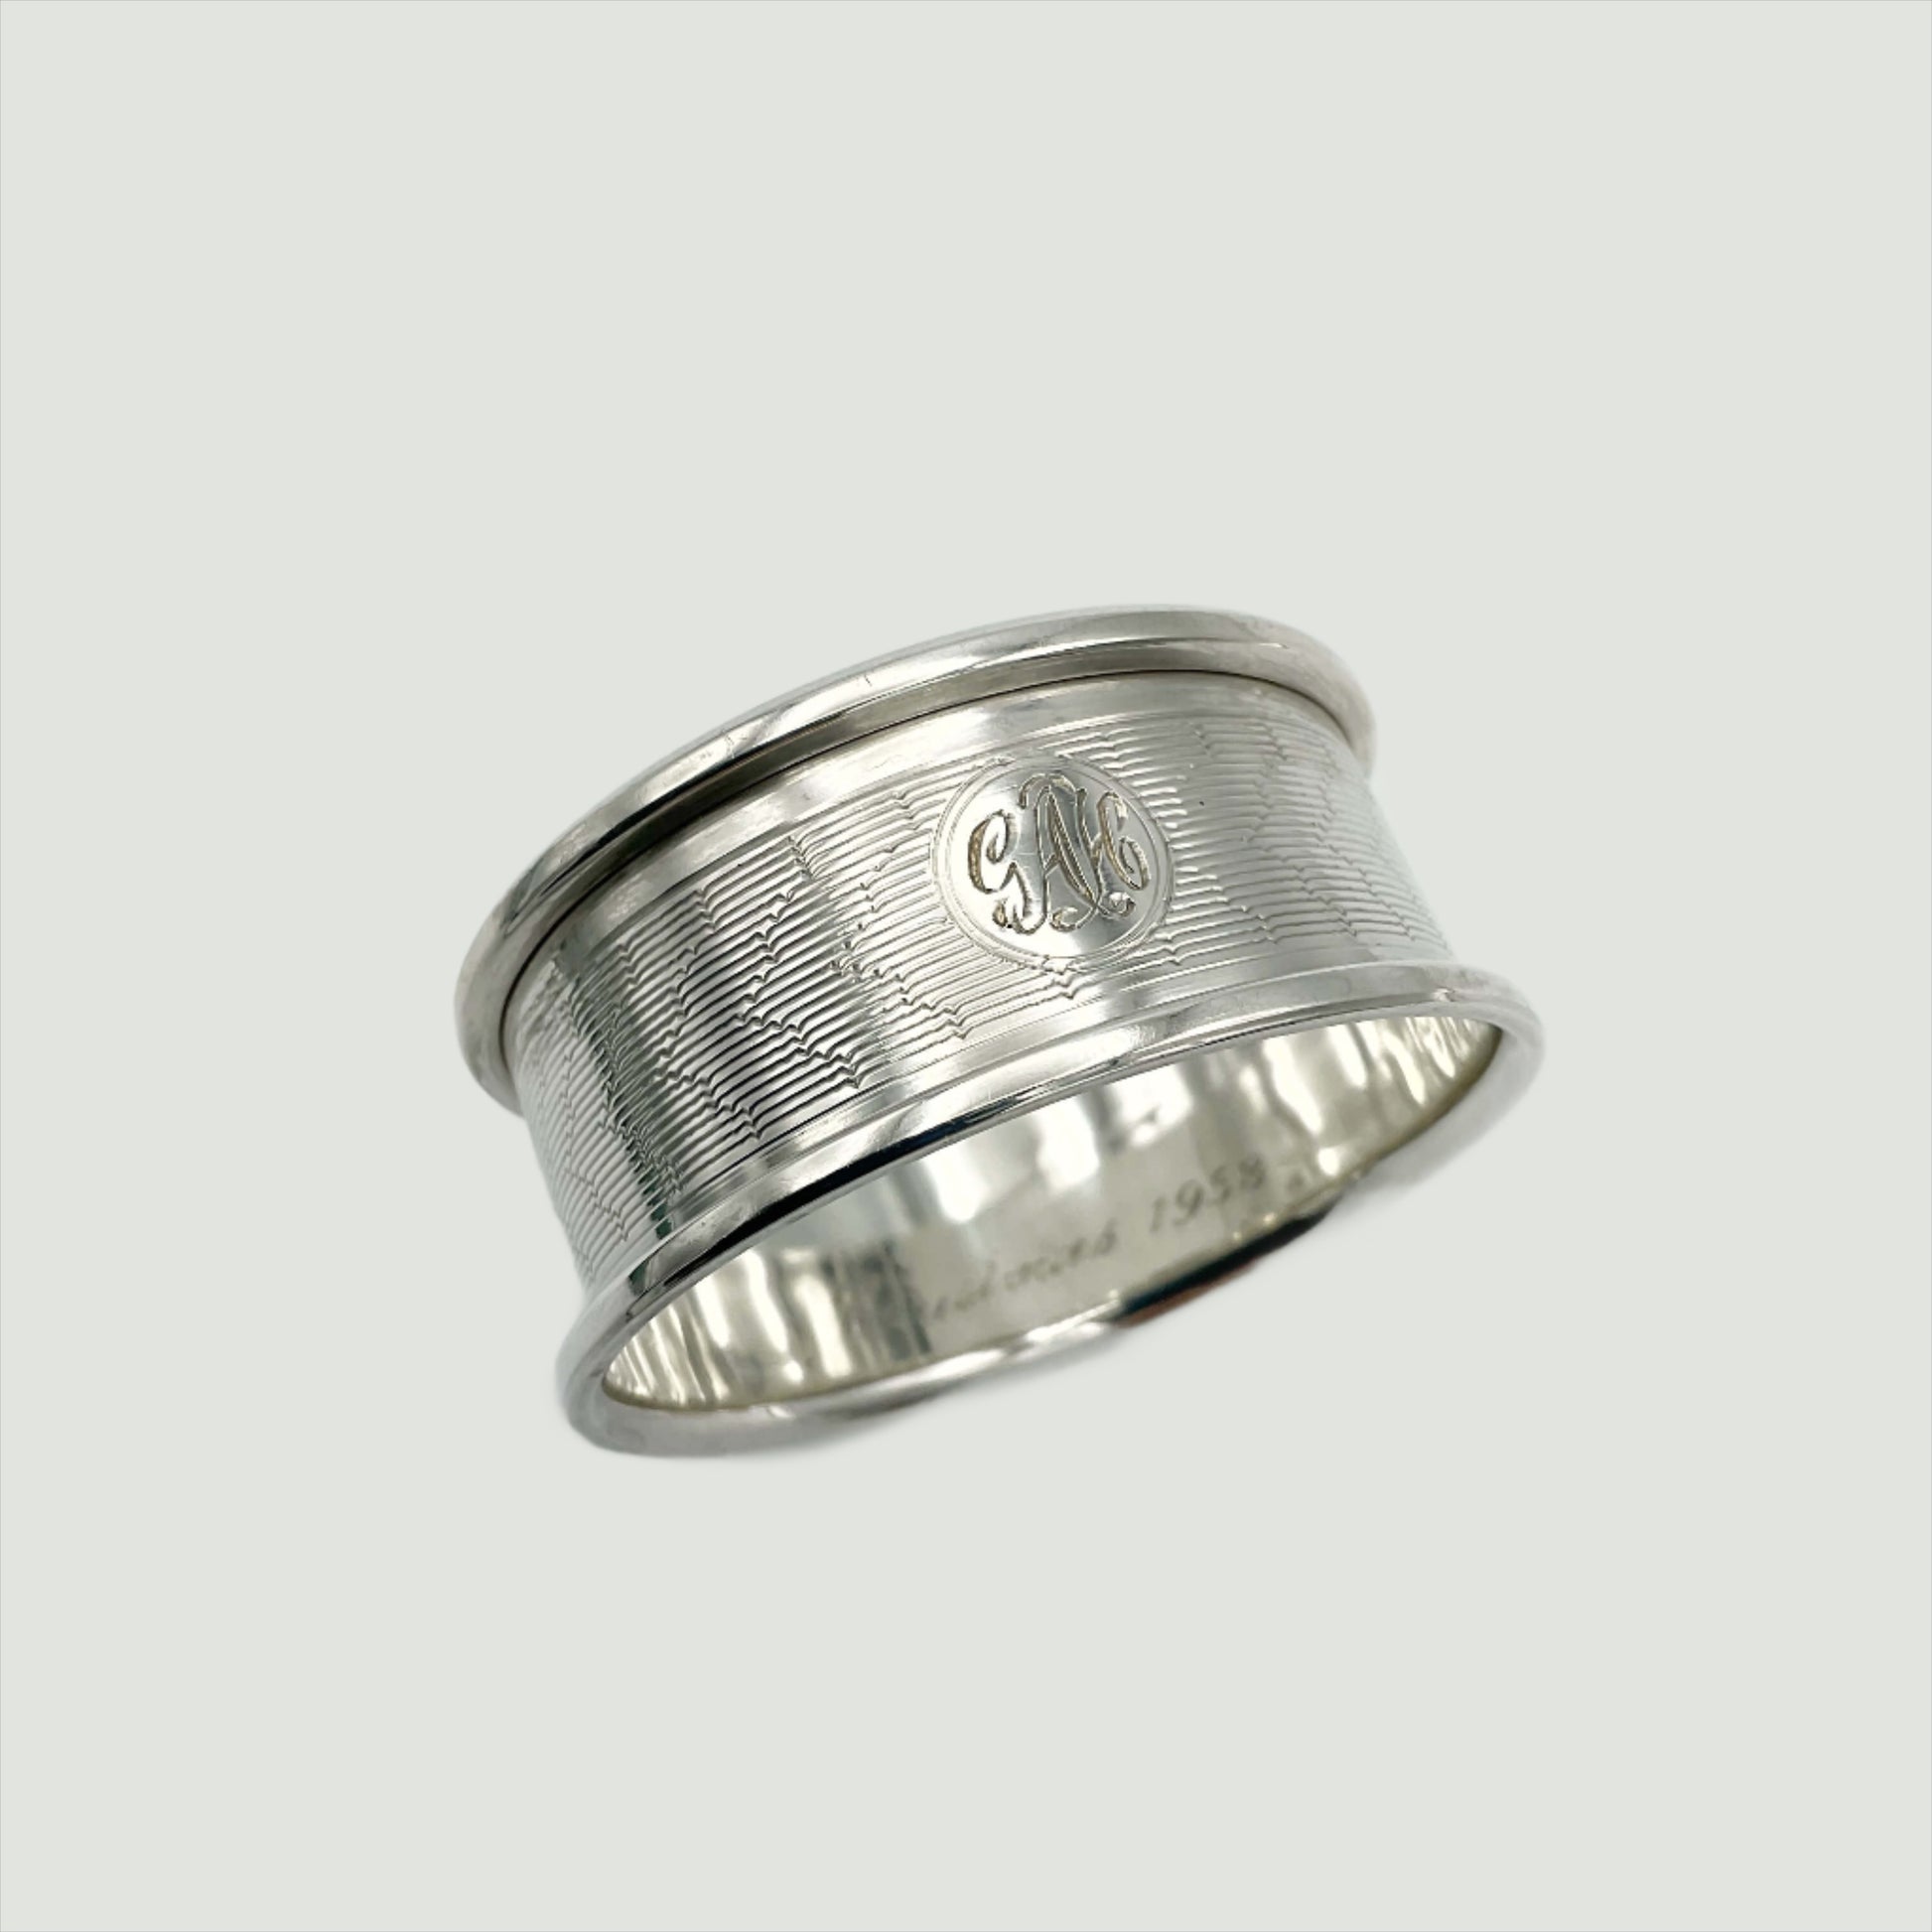 Silver napkin ring on a plain background 